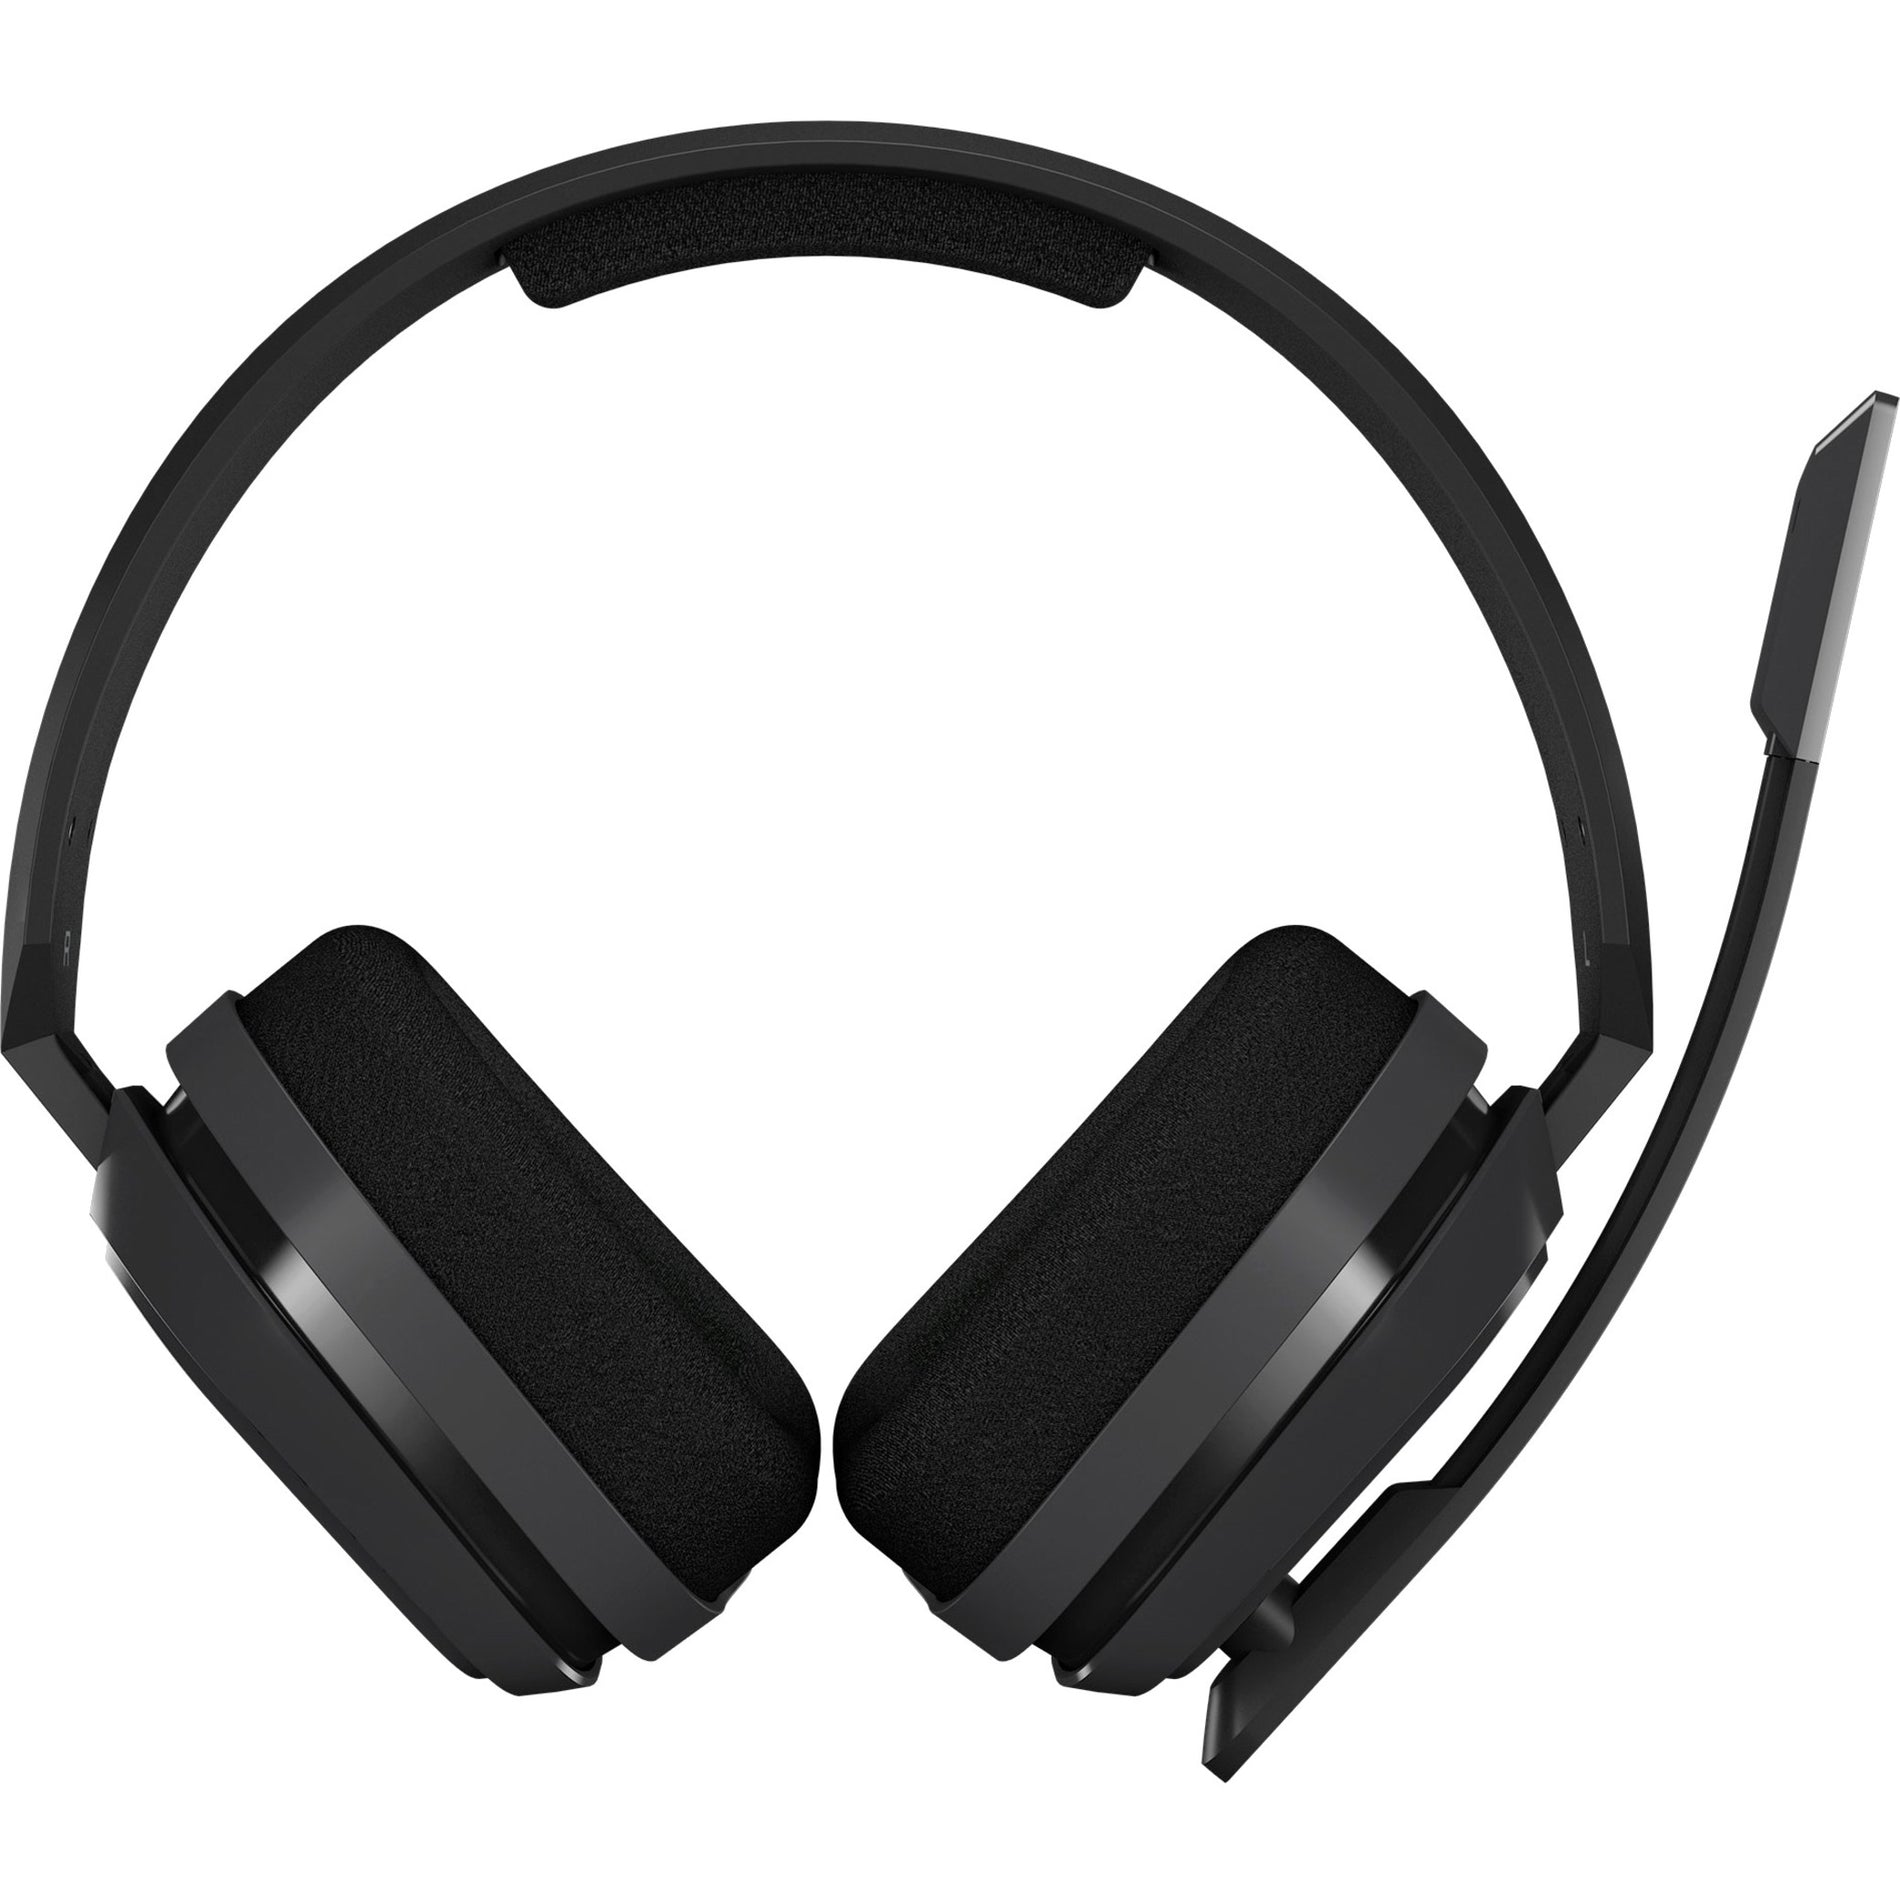 Astro A10 Headset - Over-the-ear, Over-the-head, Binaural, Wired [Discontinued]